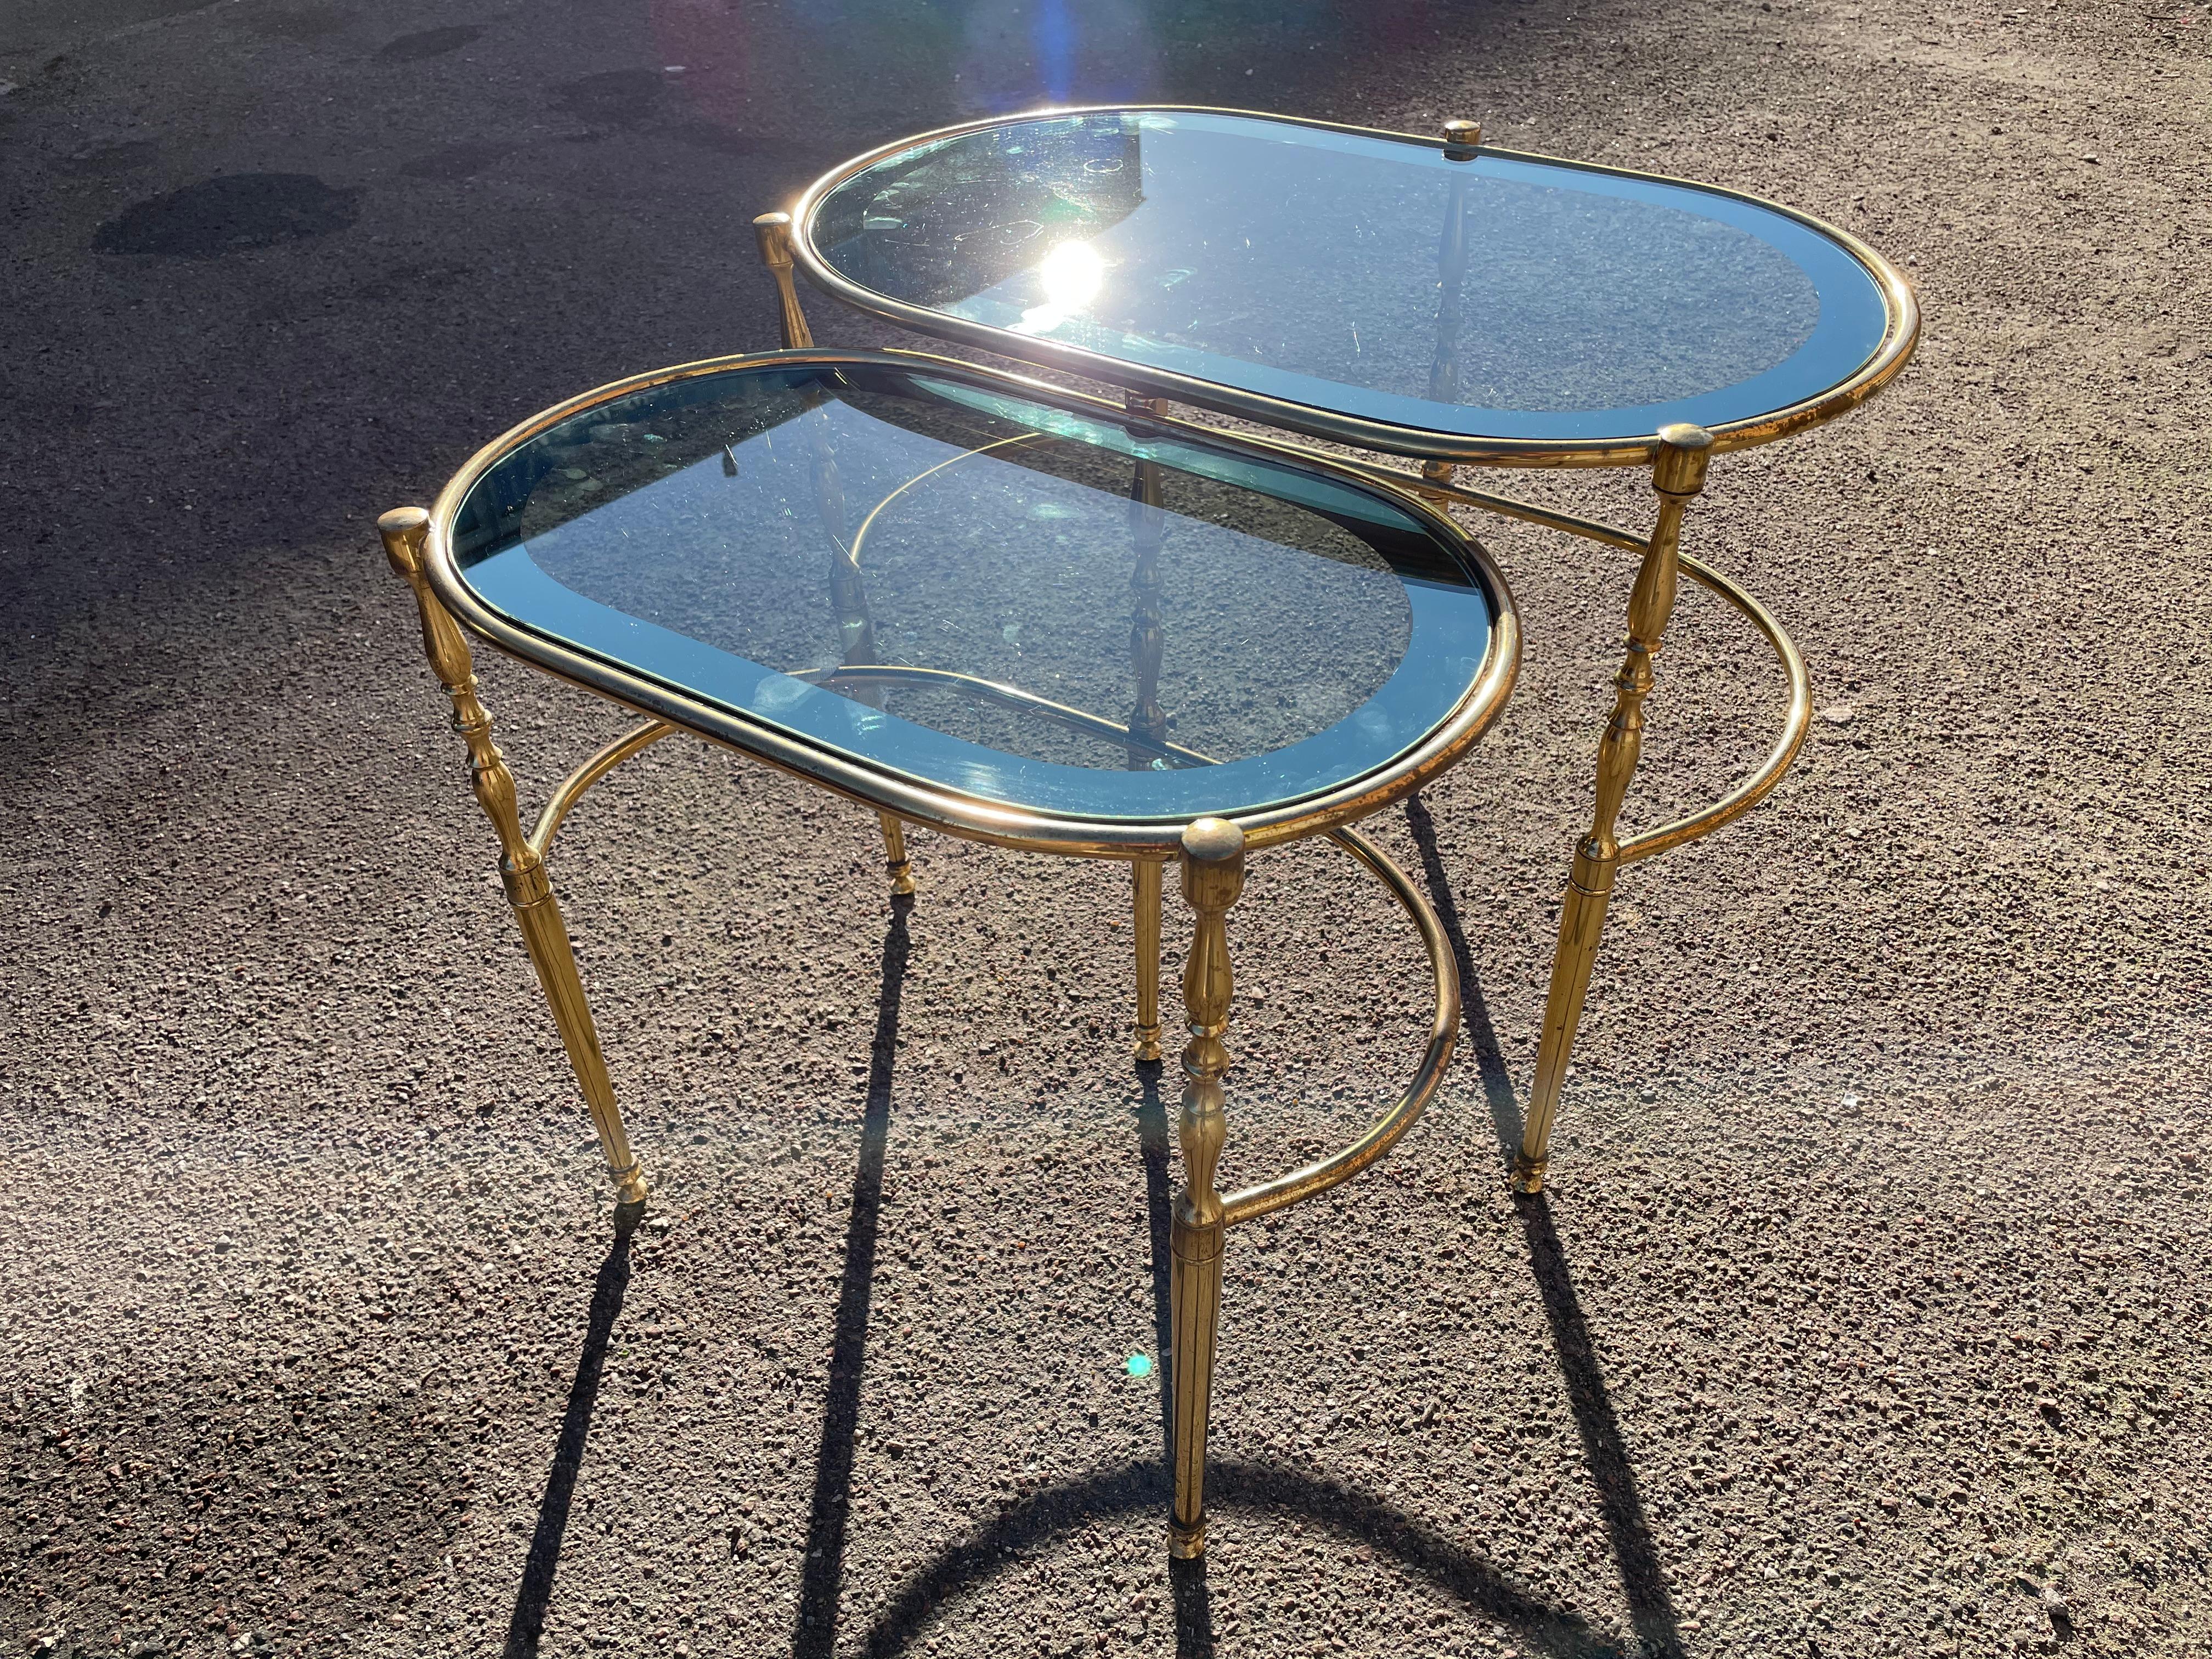 These elegant Mid-Century Modern tables from the 1970s are fragile but strong and long lasting from great craftsmanship. And with a beautiful shaded glass and finish.